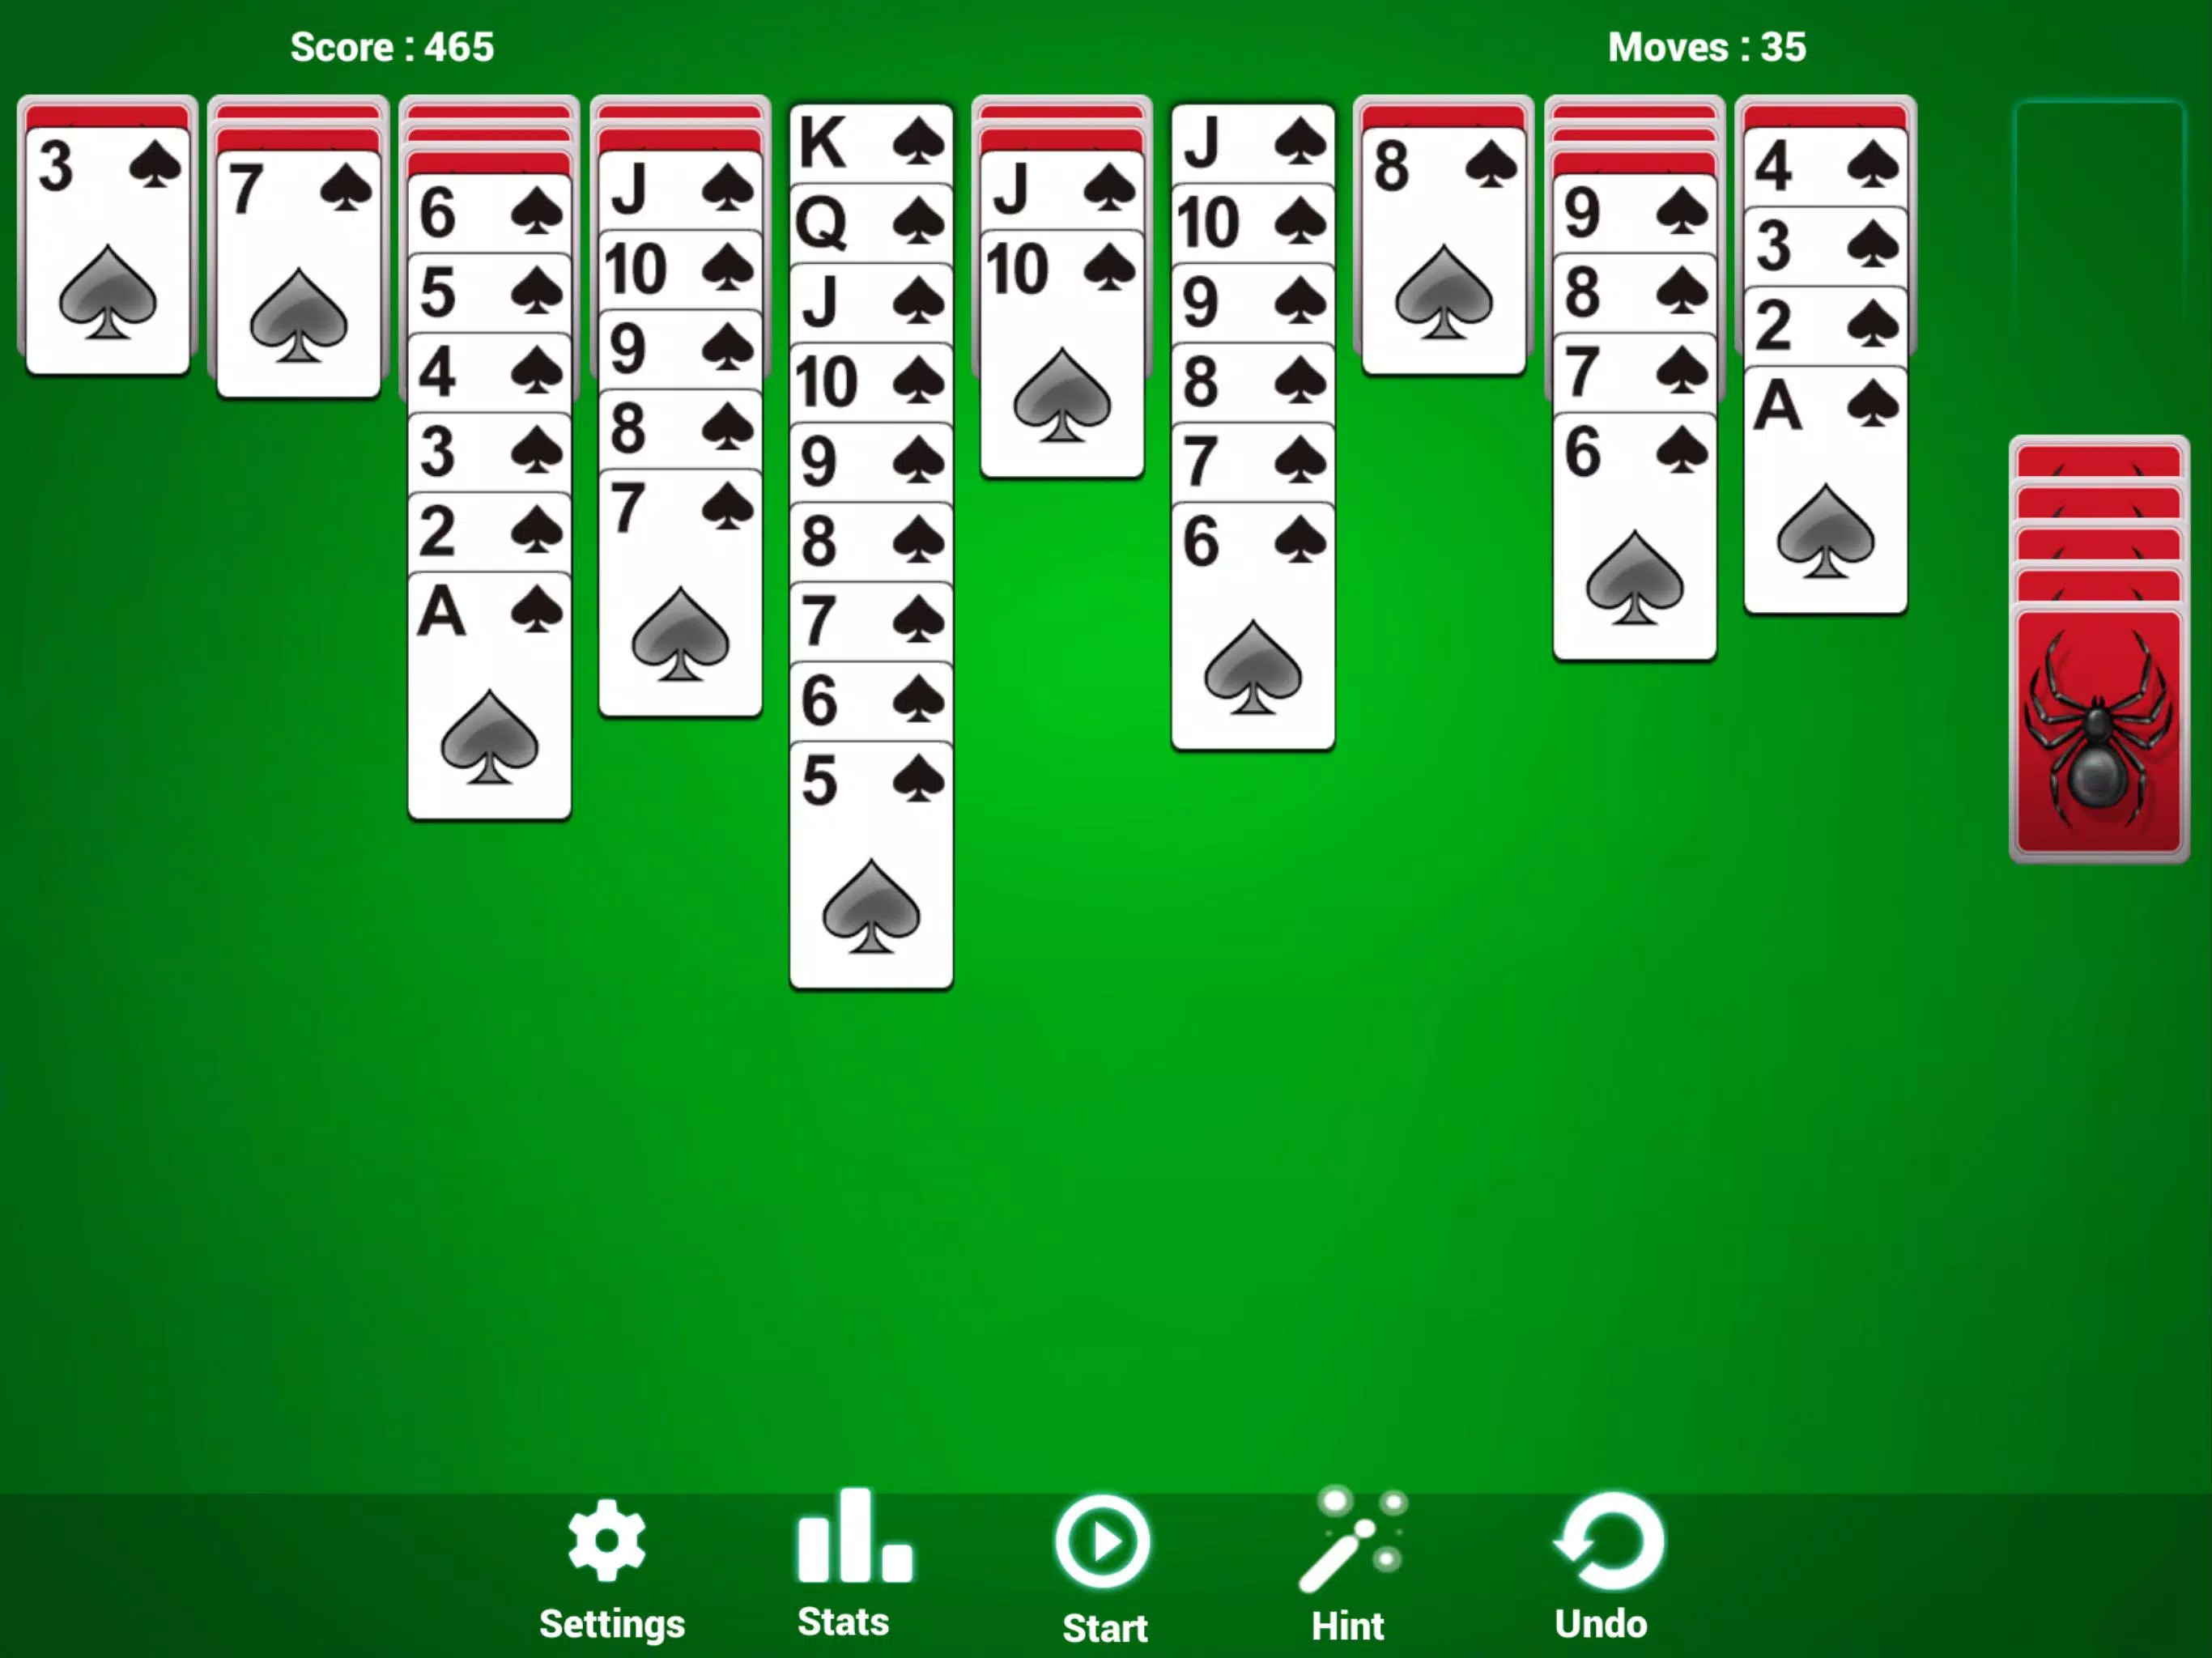 Spider solitaire classic : free offline card game APK للاندرويد تنزيل